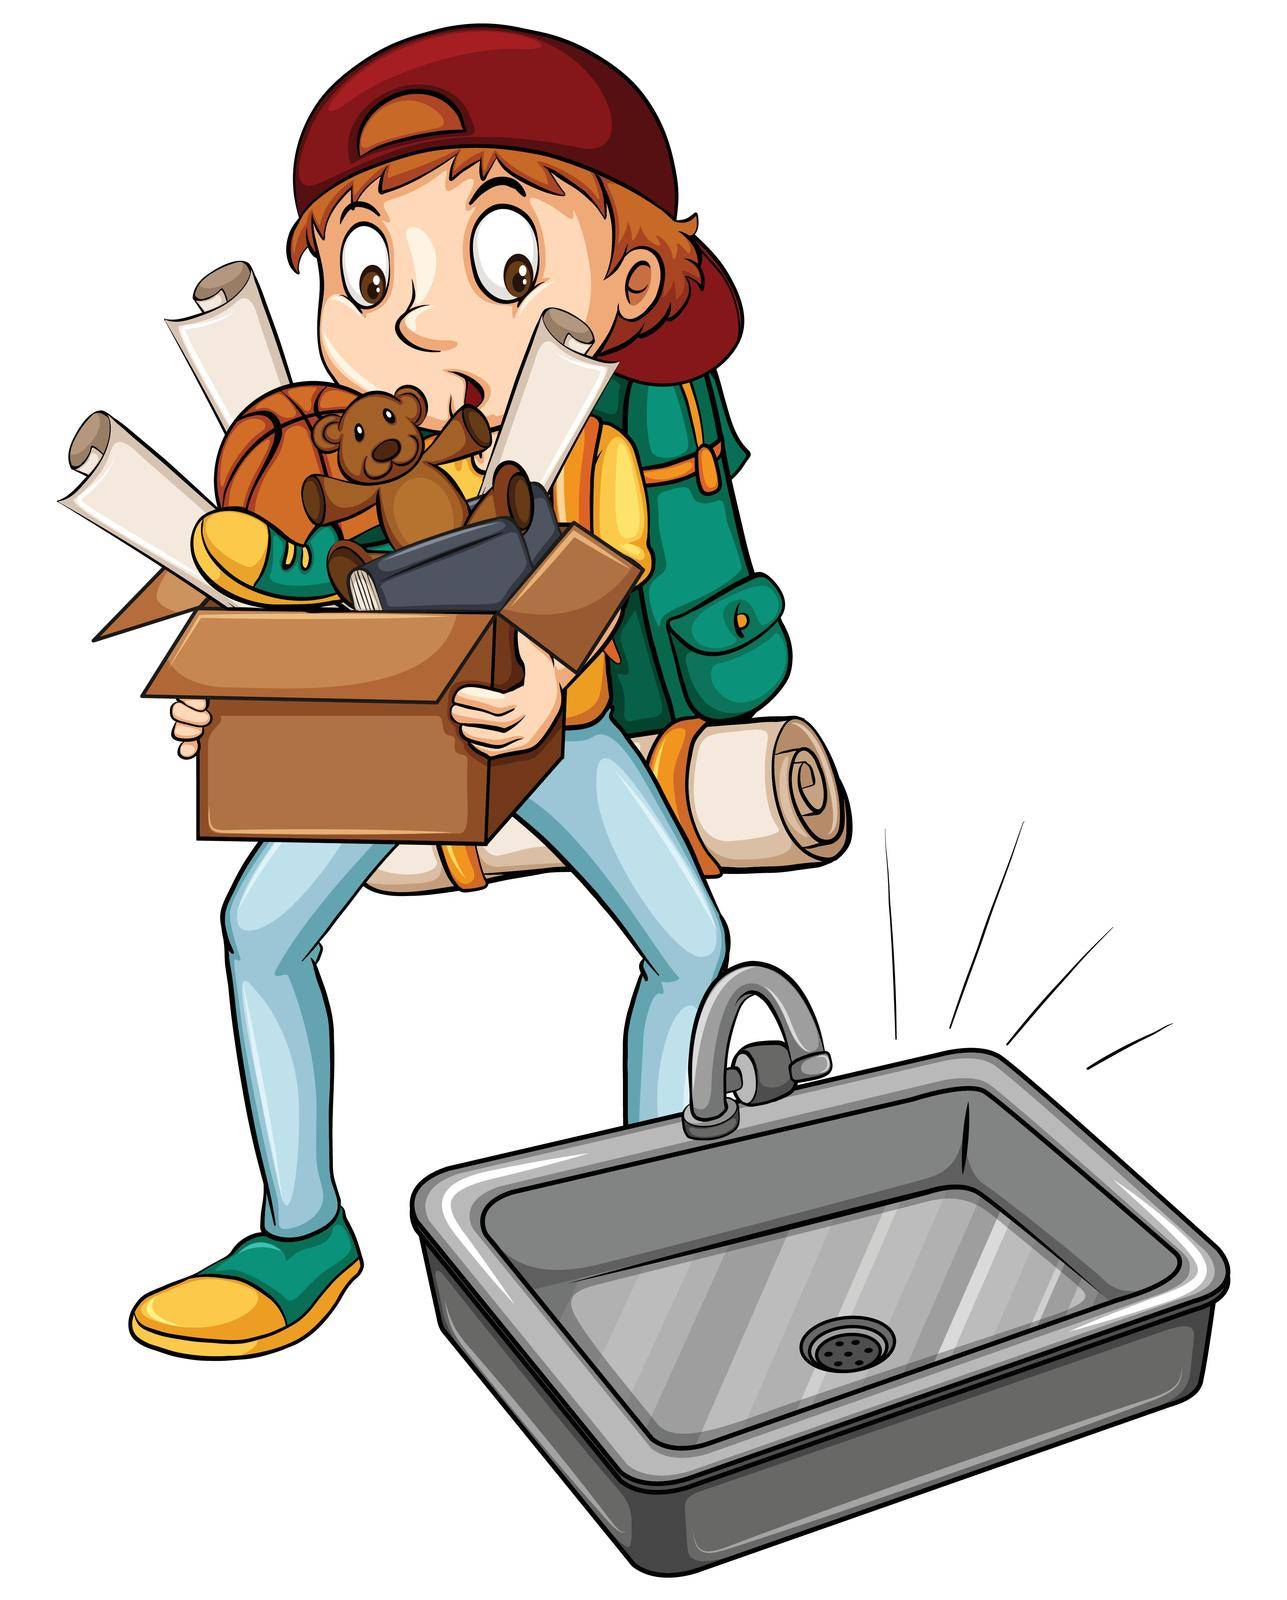 A boy carrying a box near the sink on a white background